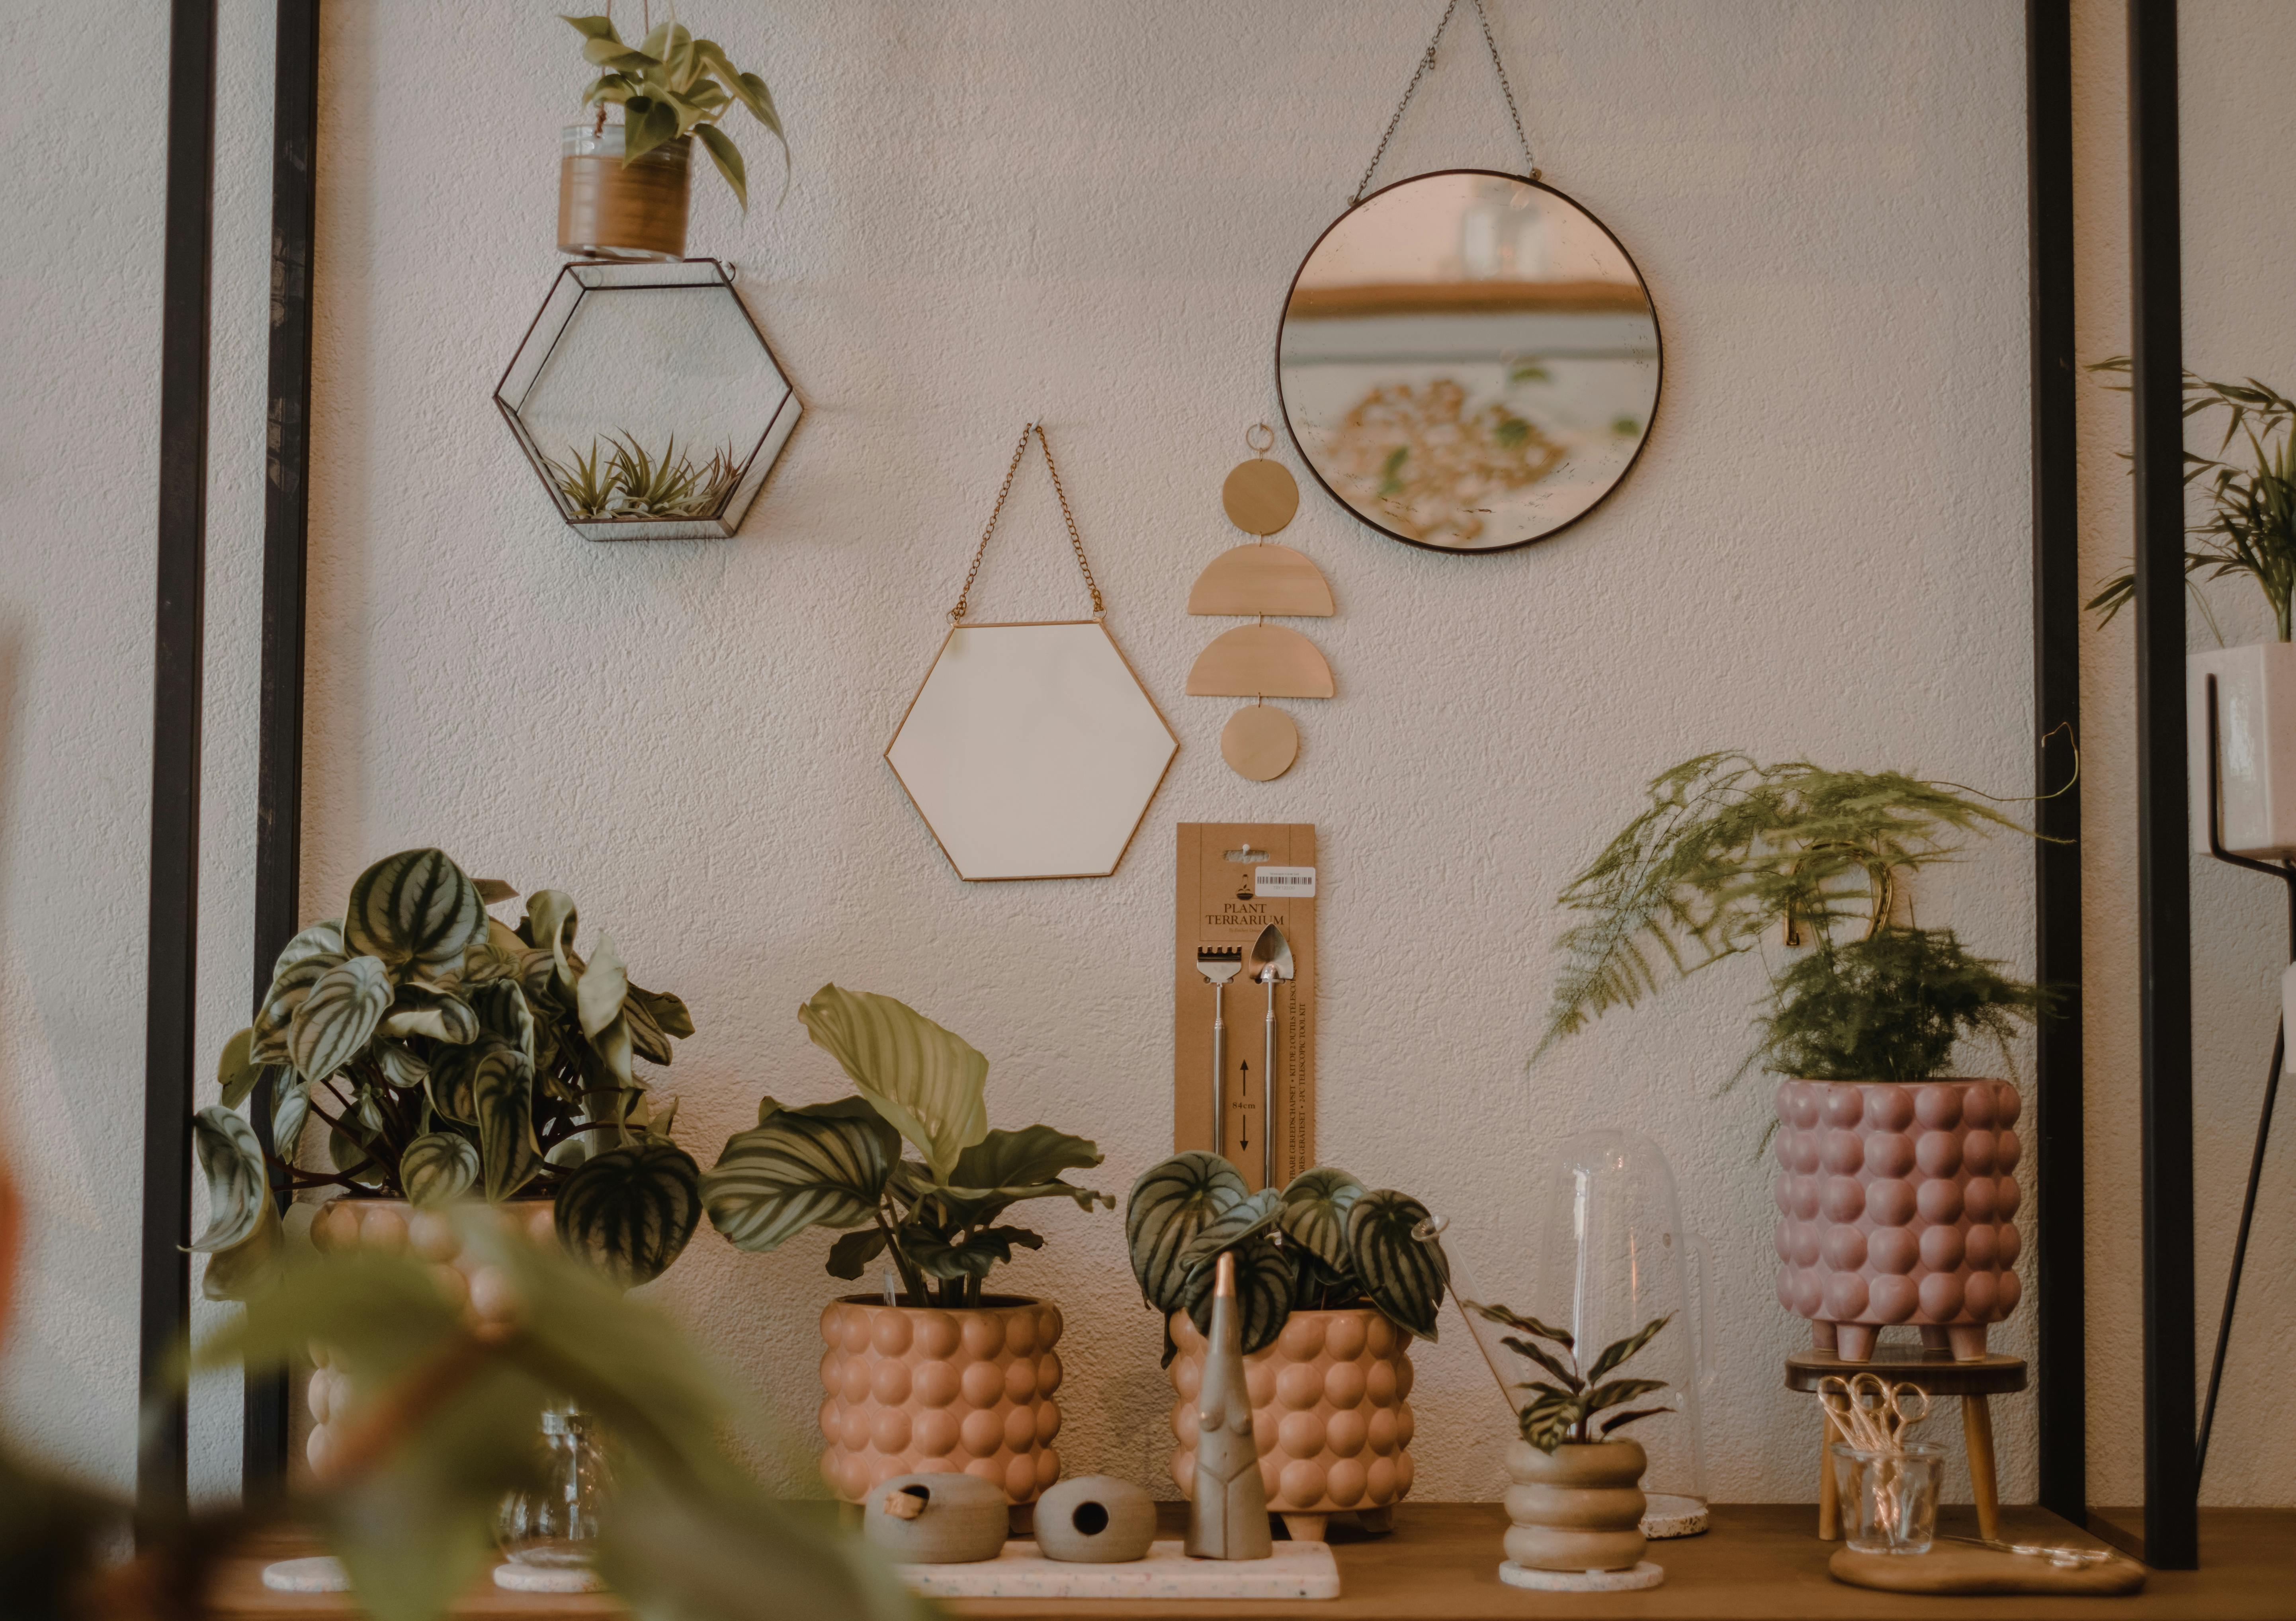 Potted plants and mirrors near wall · Free Stock Photo